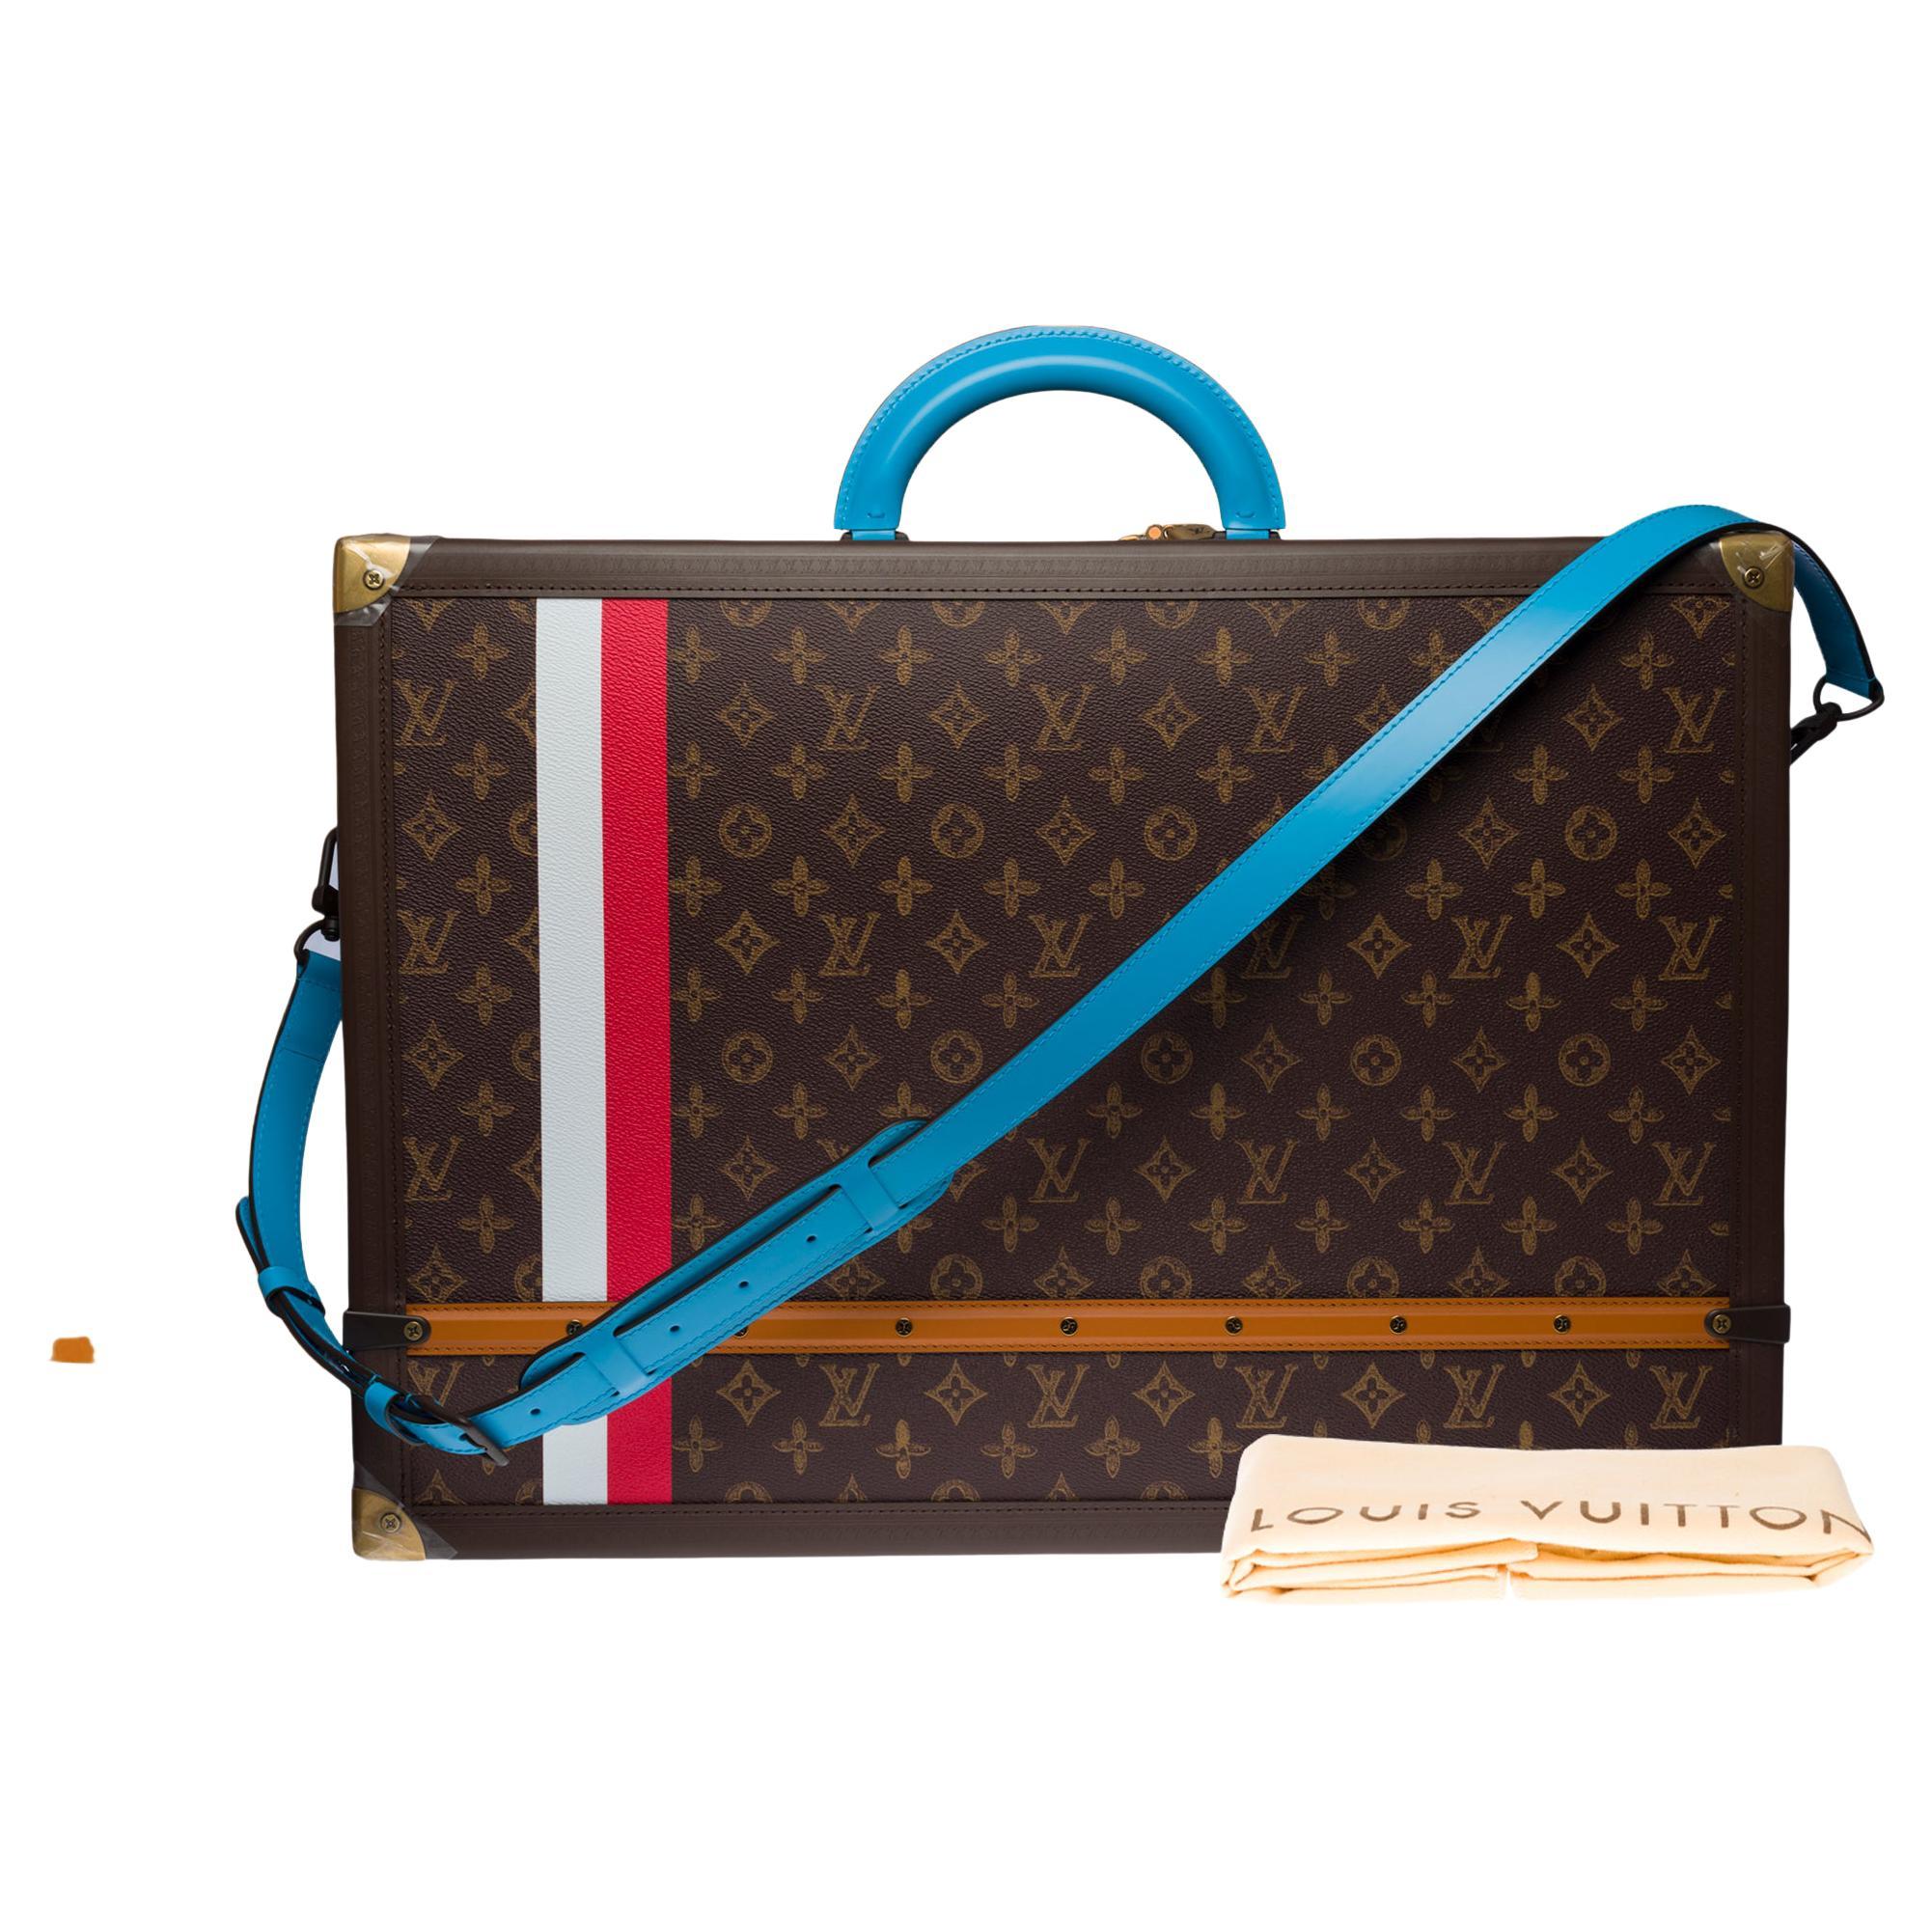 Homage to the LV Trunk